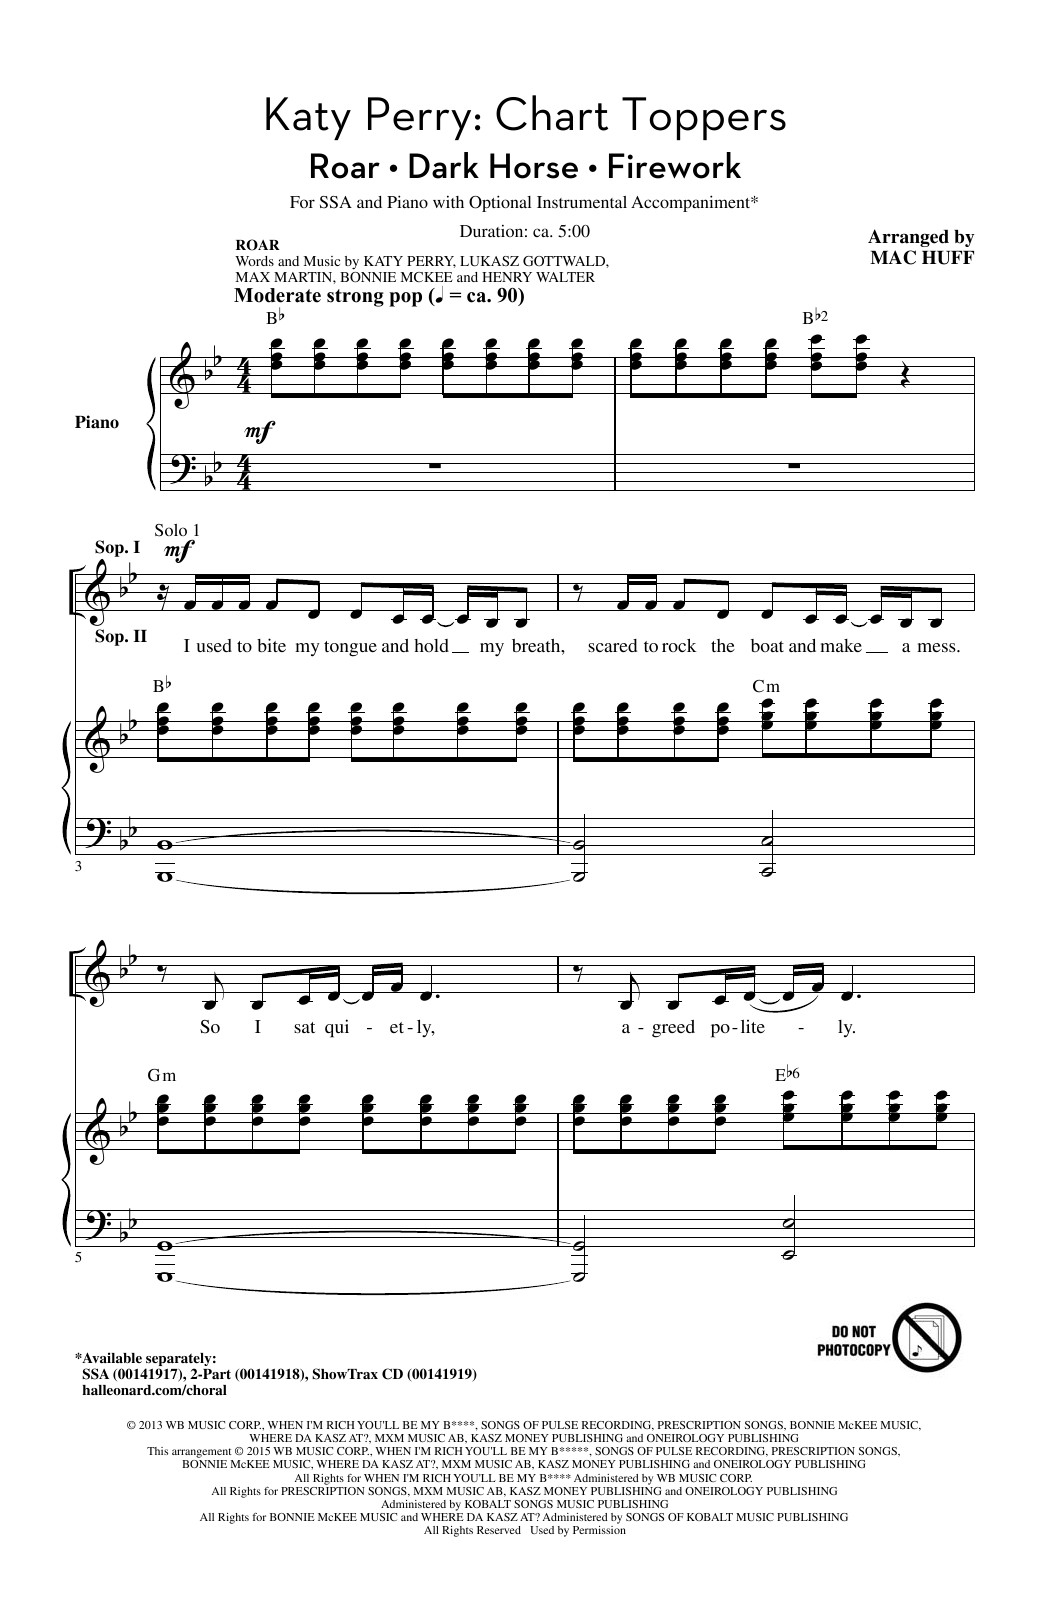 Download Mac Huff Katy Perry: Chart Toppers Sheet Music